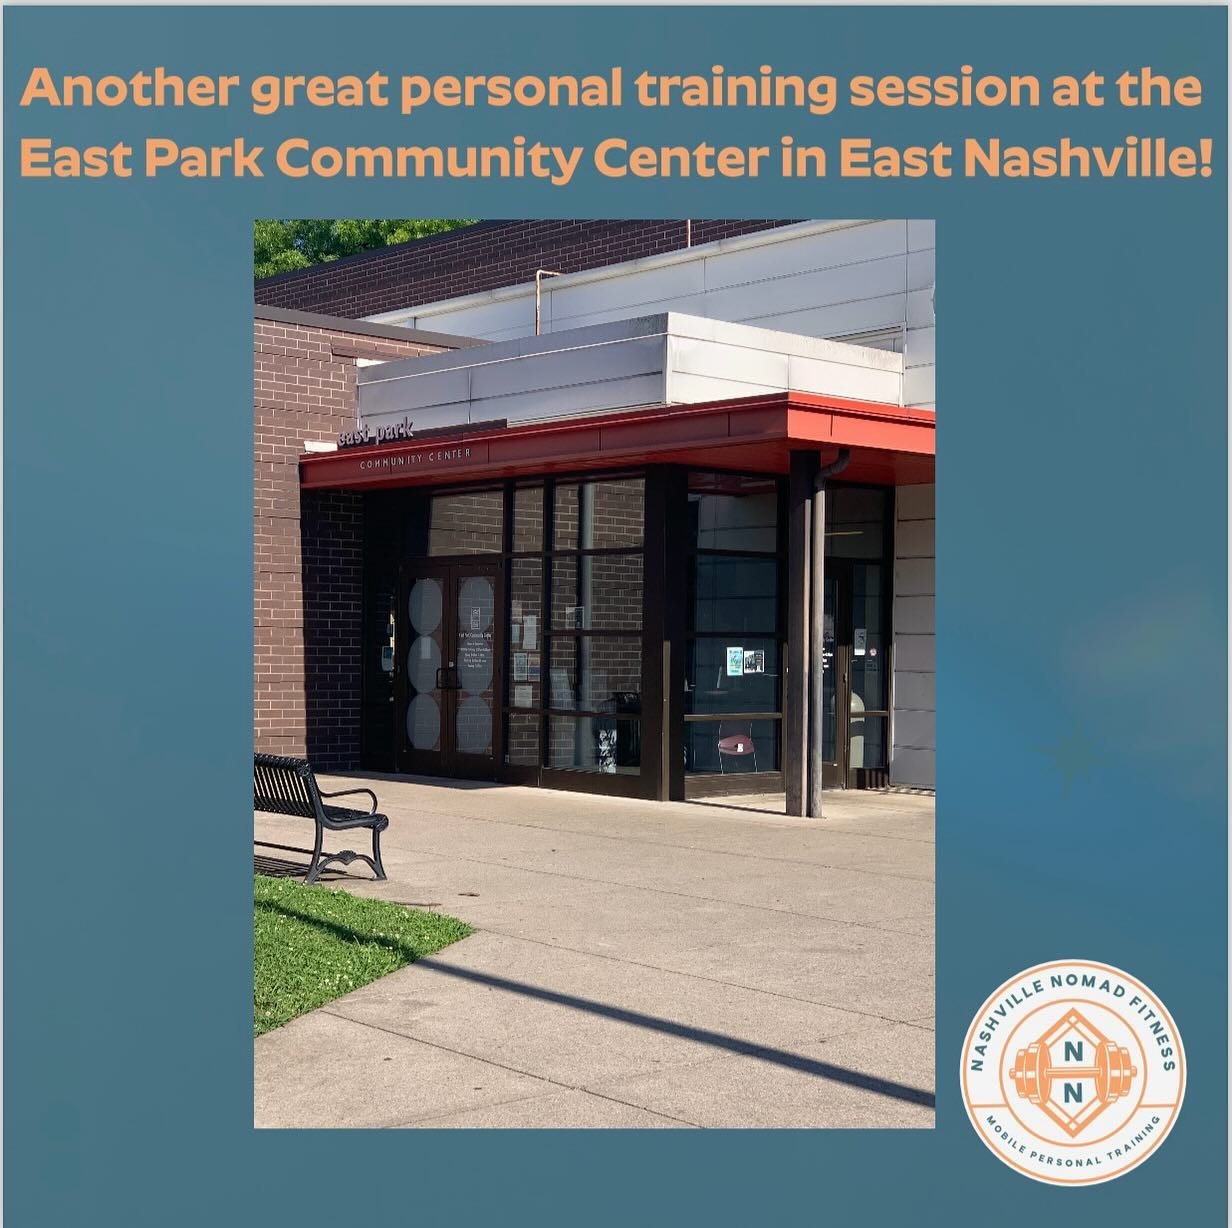 Love training one of my favorite clients at the East Park Community Center in East Nashville!!

A request came in asking if I would train them at this facility, went to check out the space, and happily obliged!  Fantastic gym with all the equipment t